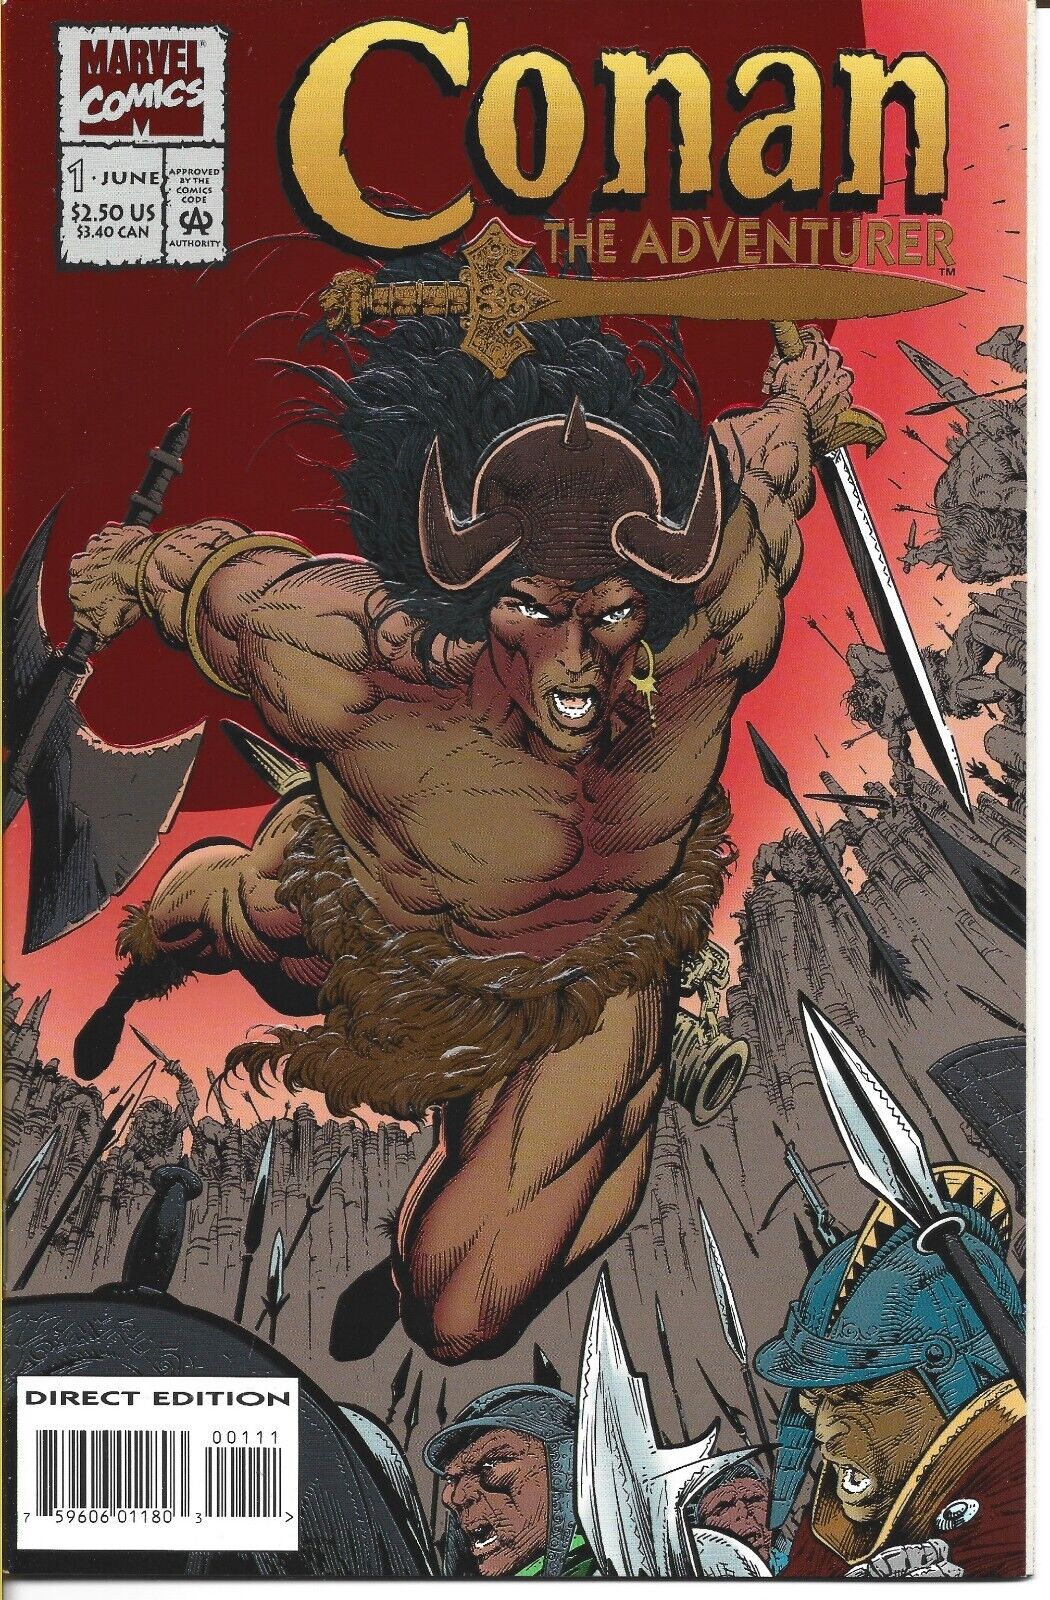 CONAN THE ADVENTURER #1 MARVEL COMICS 1994 BAGGED AND BOARDED